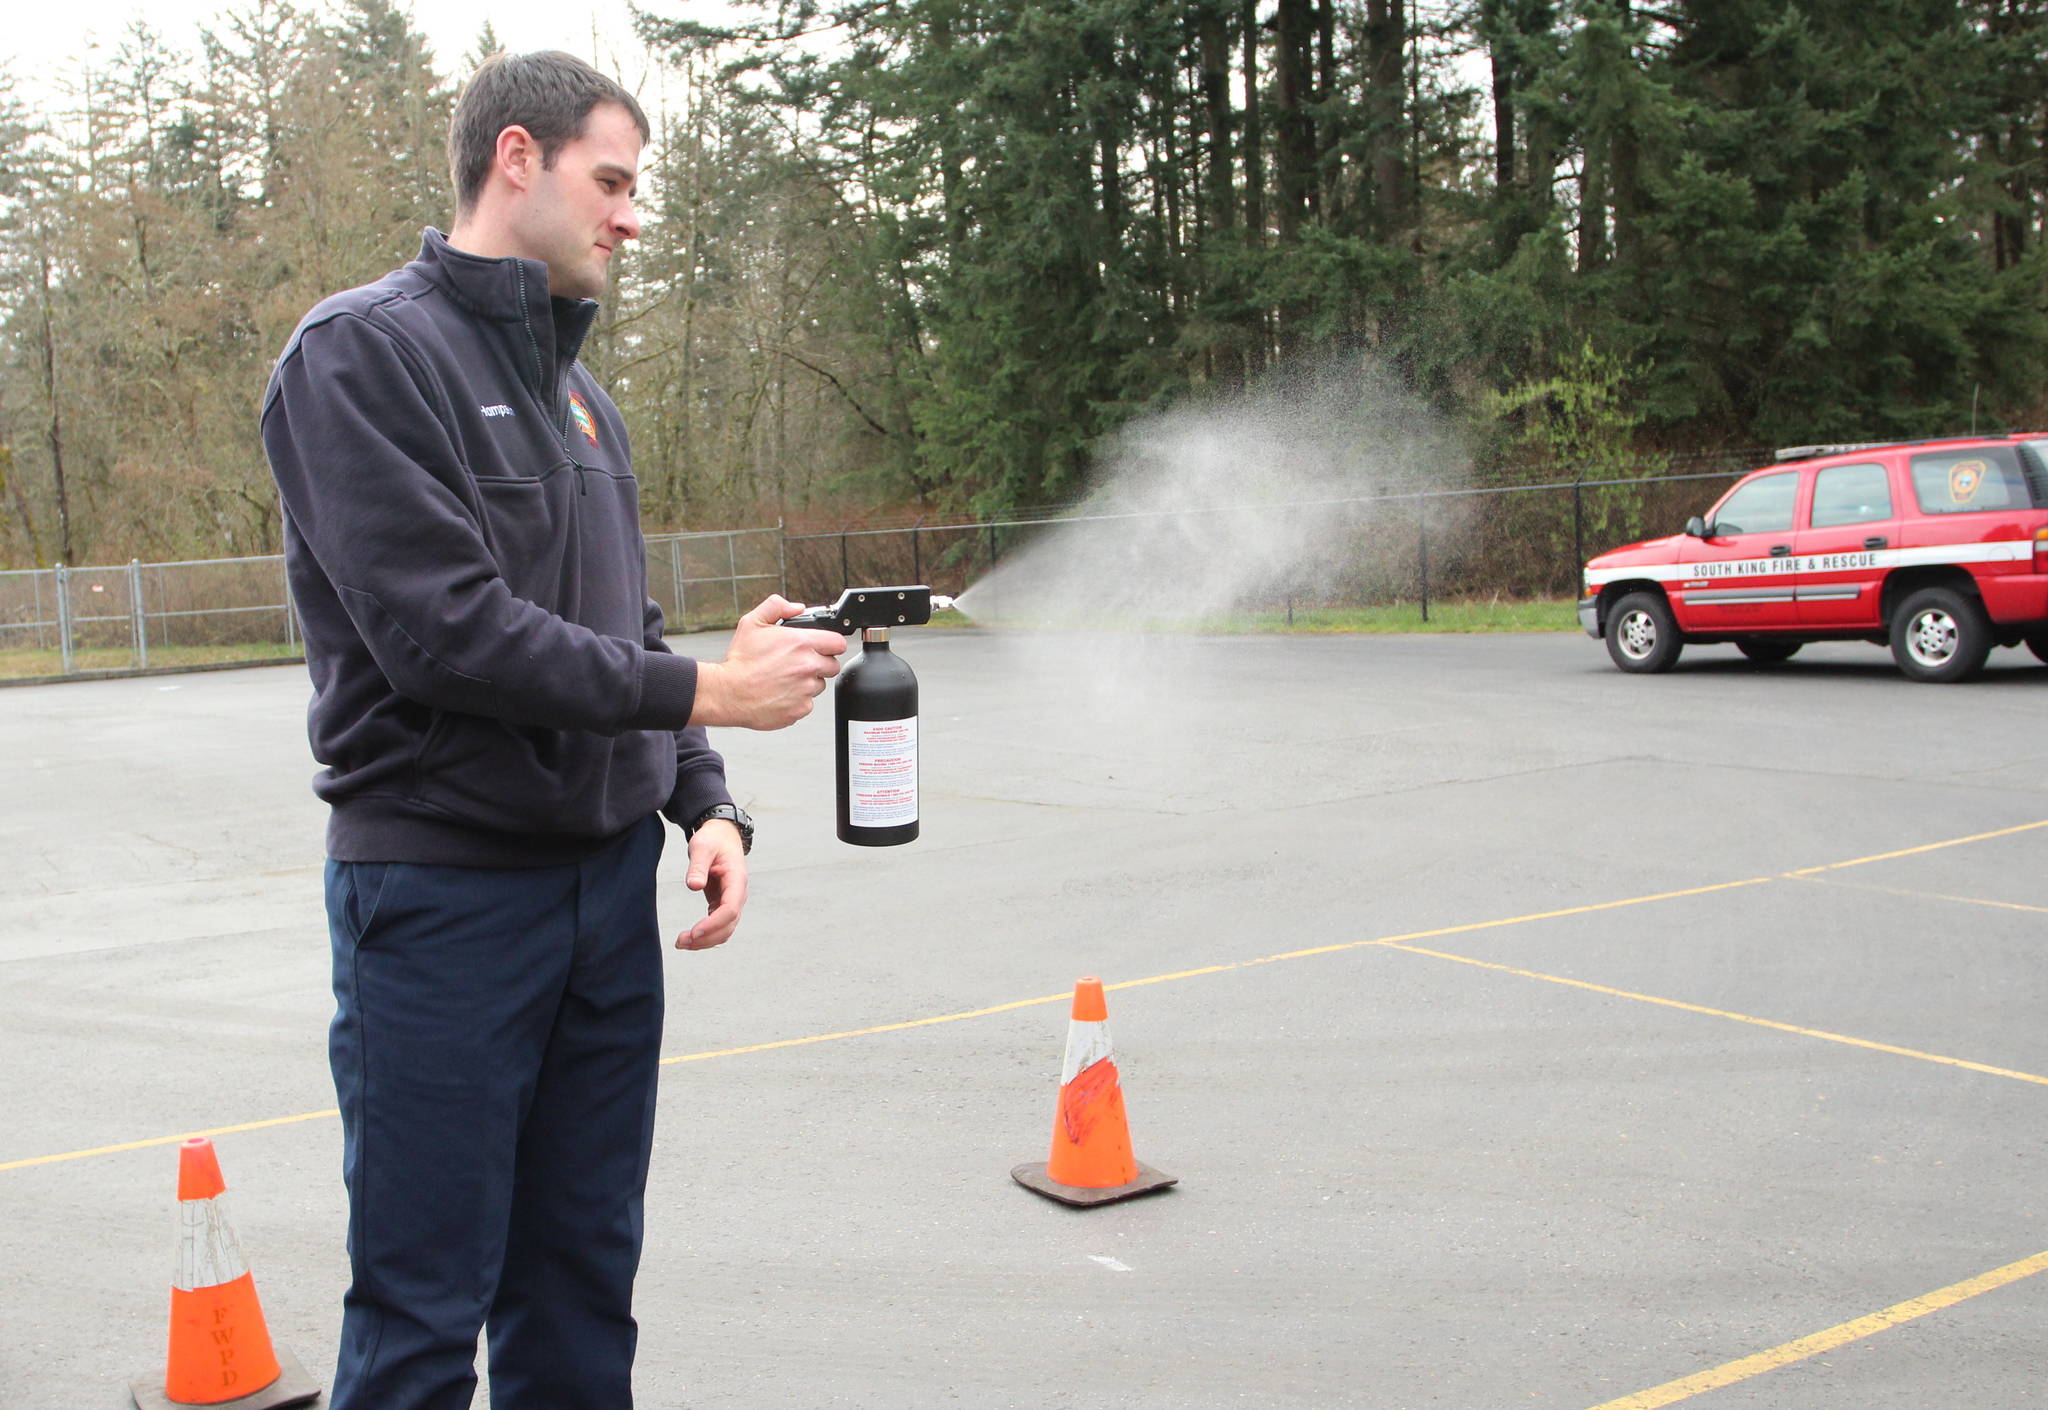 Firefighter James Hampson demonstrates the atomizing sprayer used to disinfect an officer’s weapons, body armor or other equipment. Olivia Sullivan/staff photo